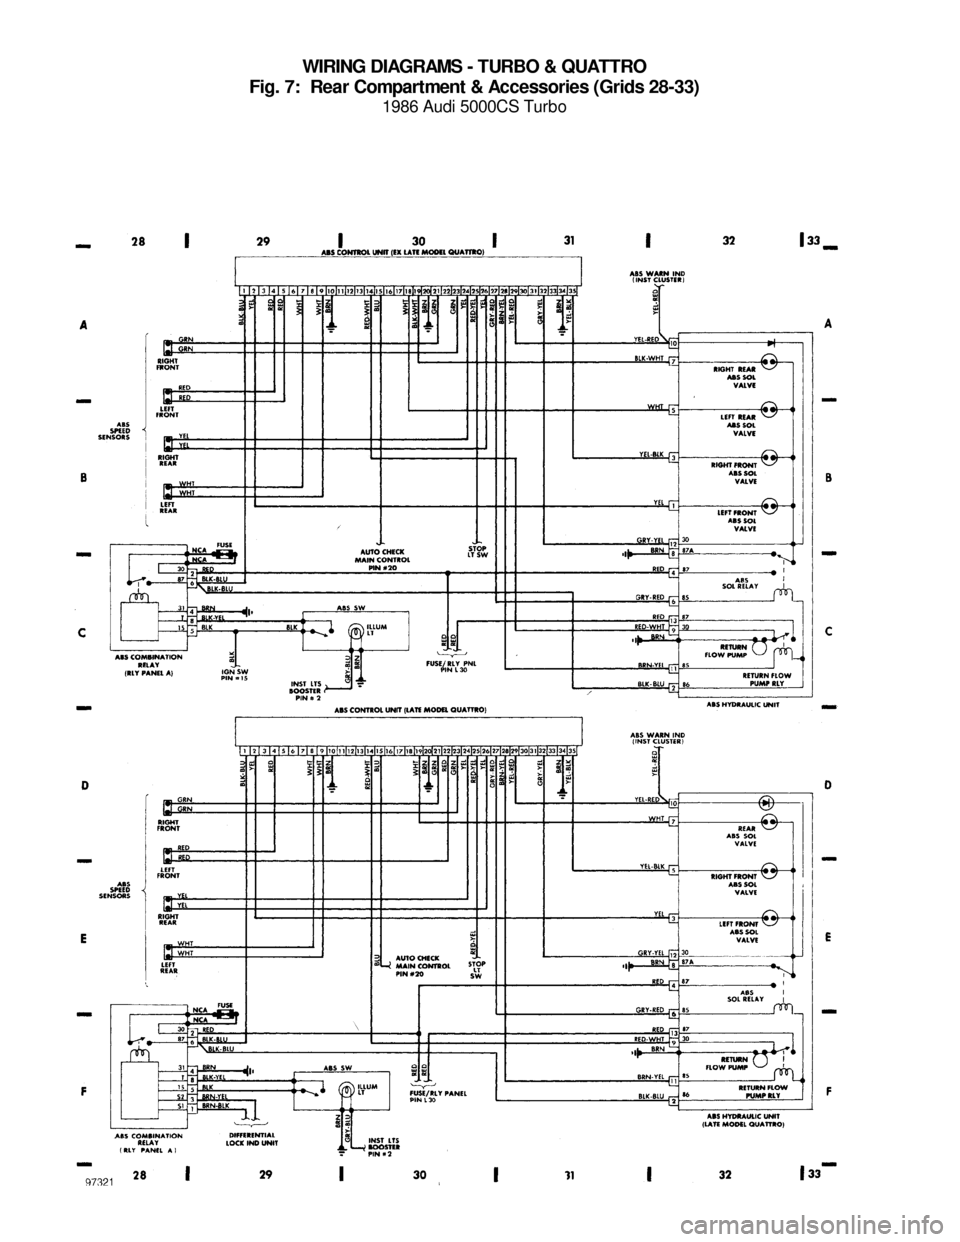 AUDI 5000CS 1986 C2 System Wiring Diagram WIRING DIAGRAMS - TURBO & QUATTRO
Fig. 7:  Rear Compartment & Accessories (Grids 28-33)
1986 Audi 5000CS Turbo
For x    
Copyright © 1998 Mitchell Repair Information Company, LLCMonday, July 19, 2004